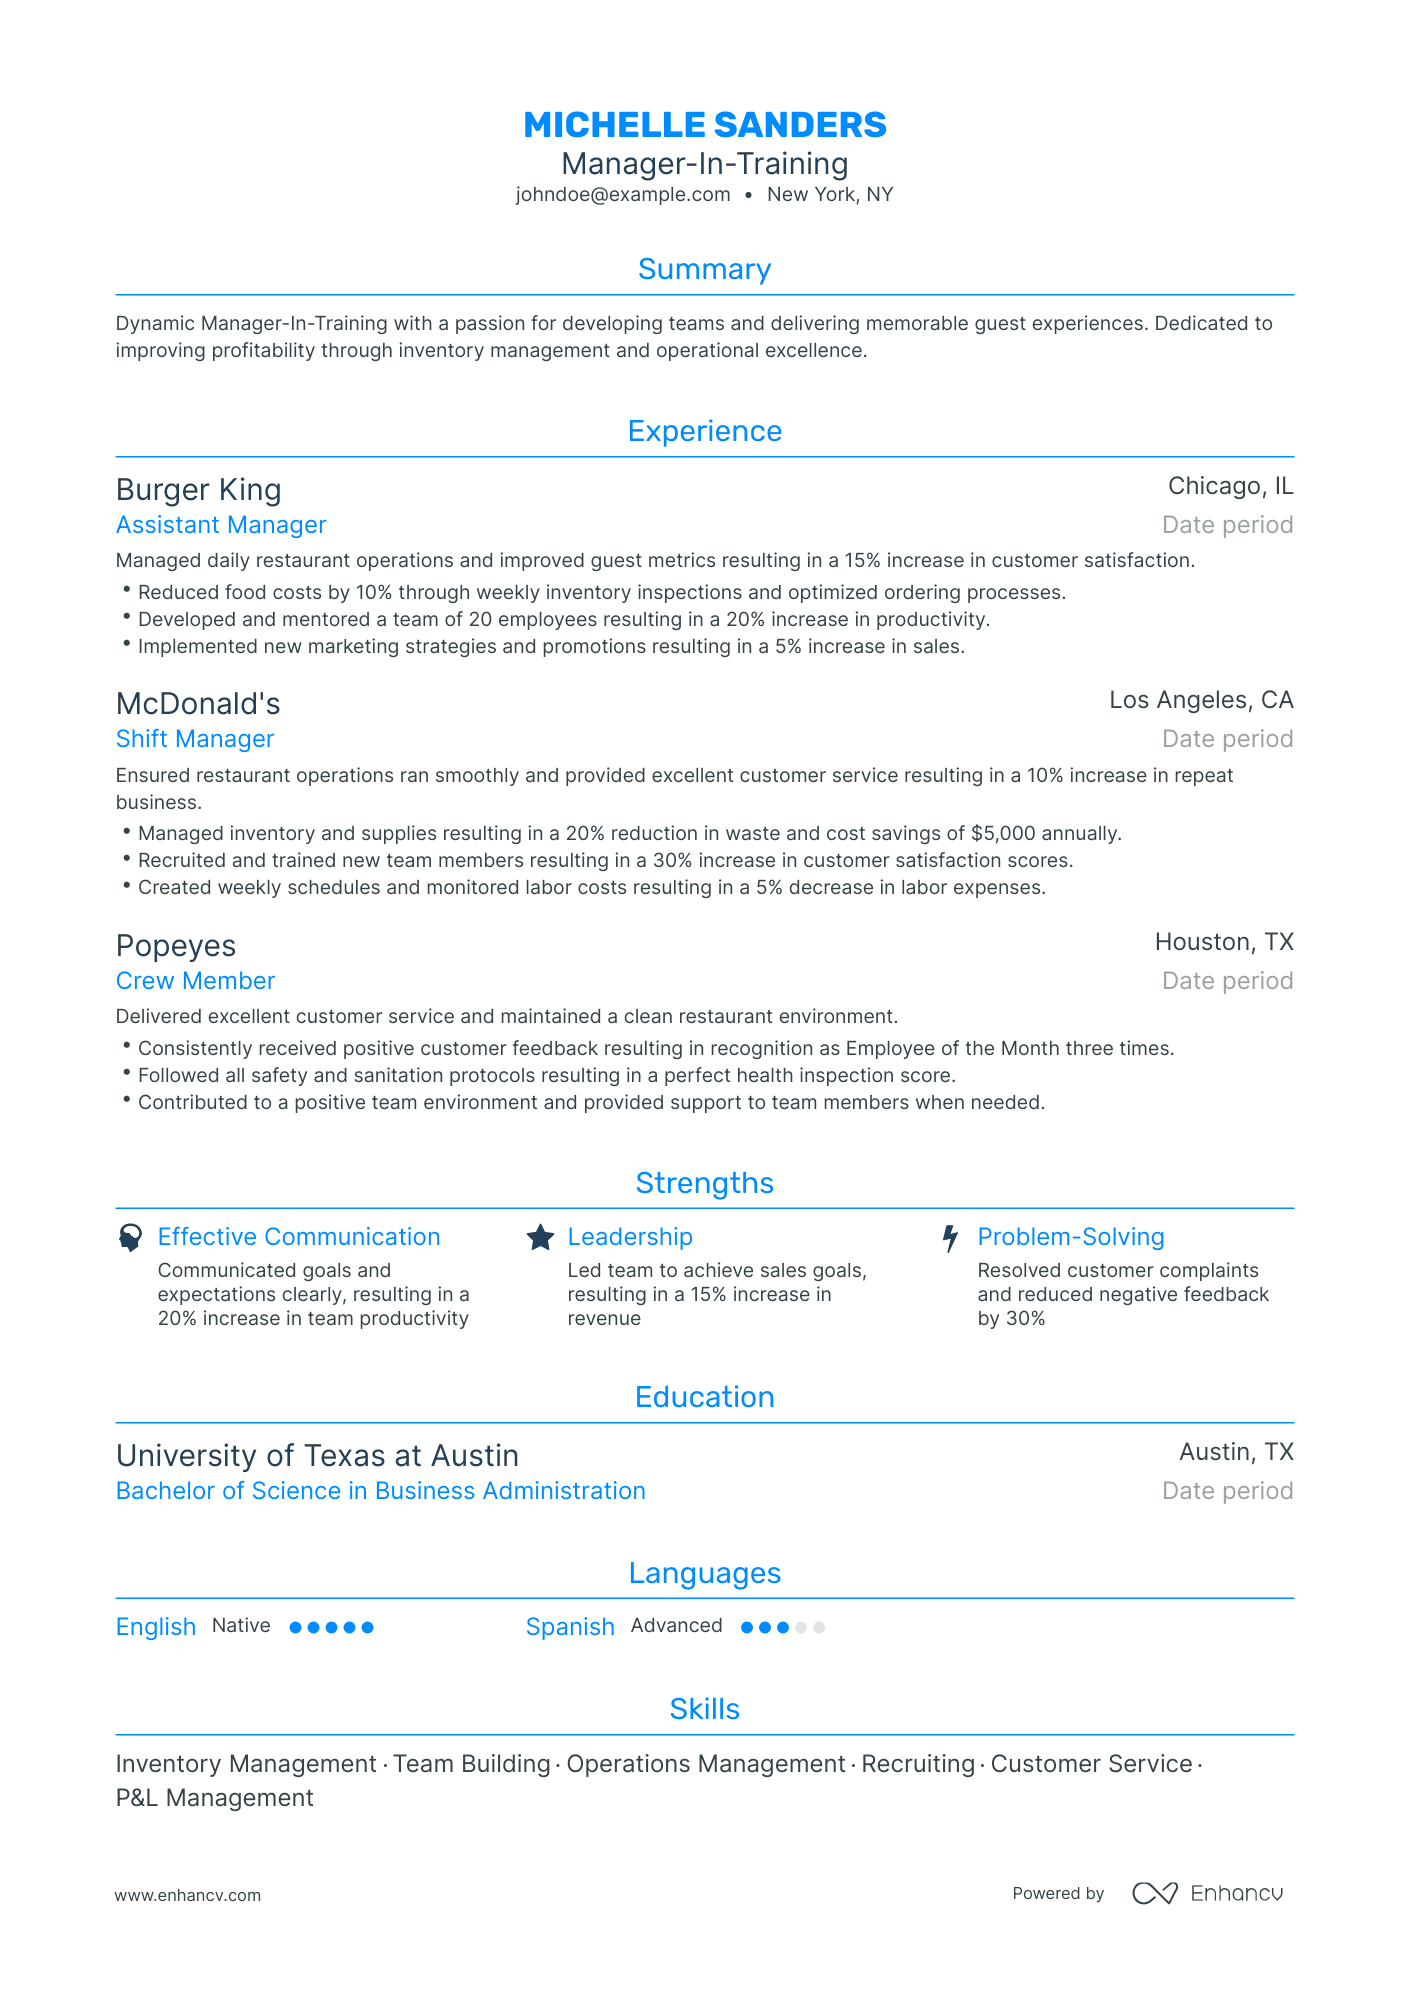 Traditional Manager In Training Resume Template